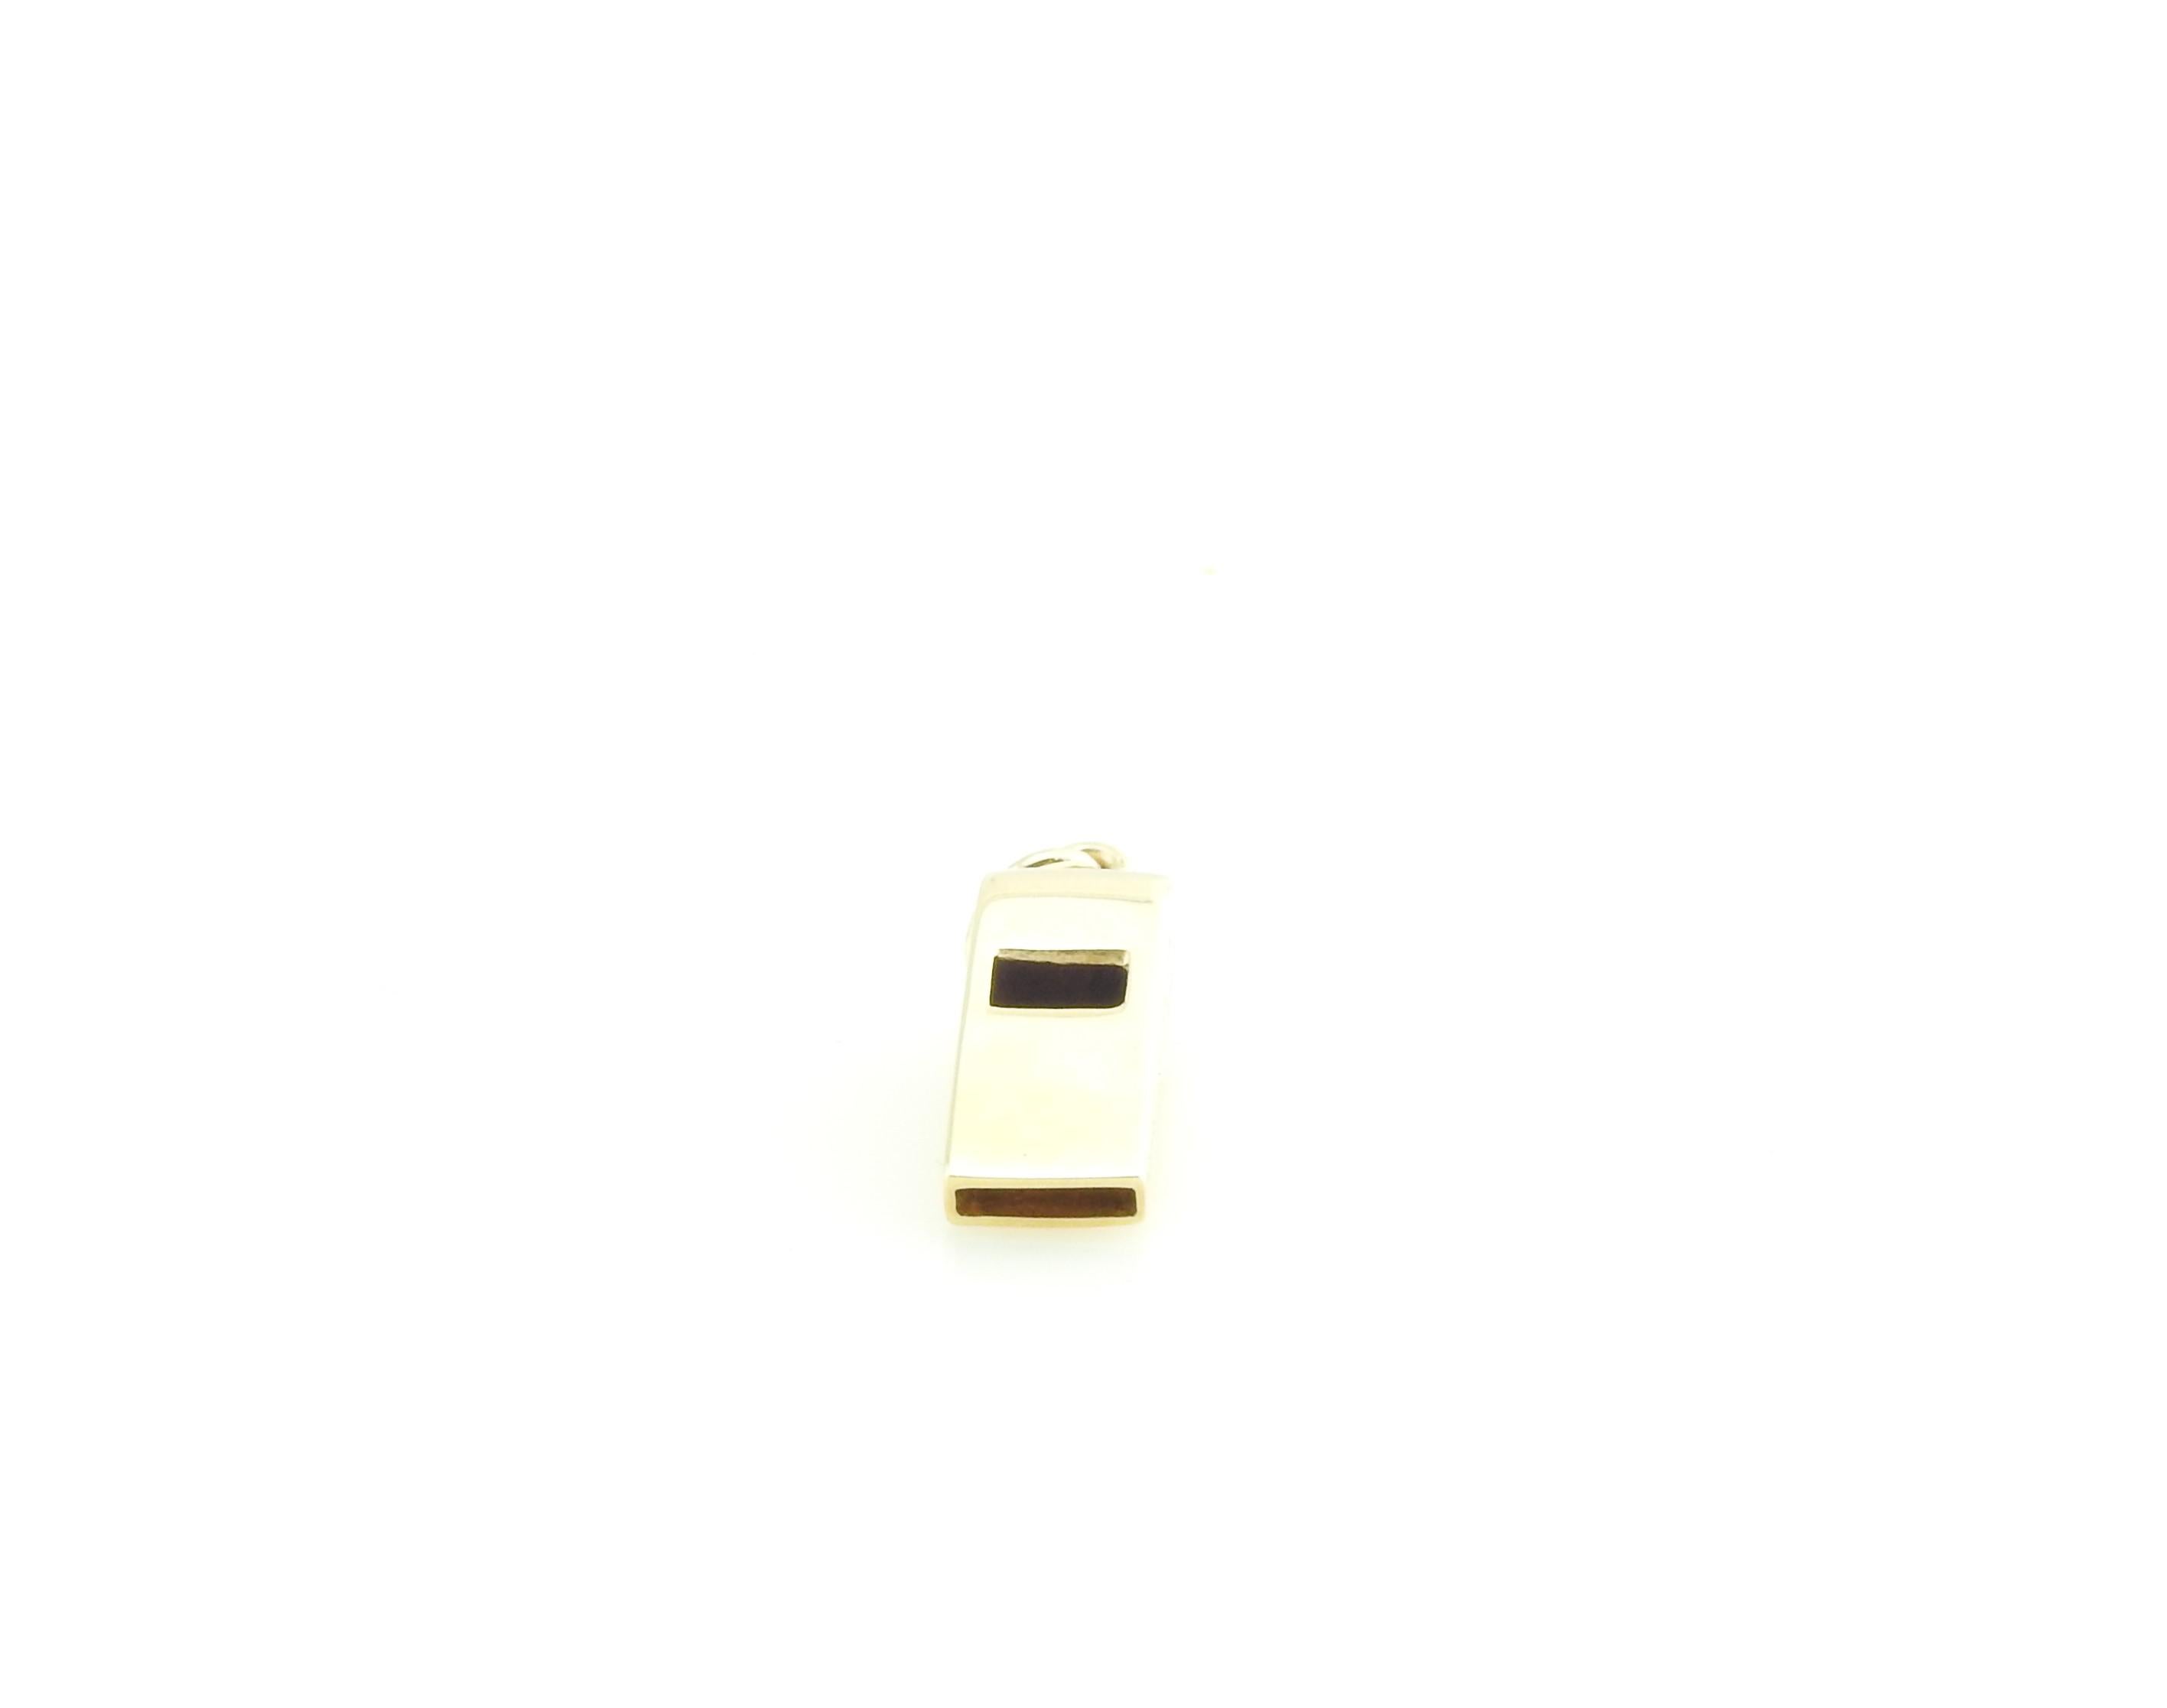 Vintage 14 Karat Yellow Gold Tiffany & Co. Whistle Charm

This lovely working whistle is crafted in meticulously detailed 14K yellow gold by Tiffany & Co. Monogram reads, 